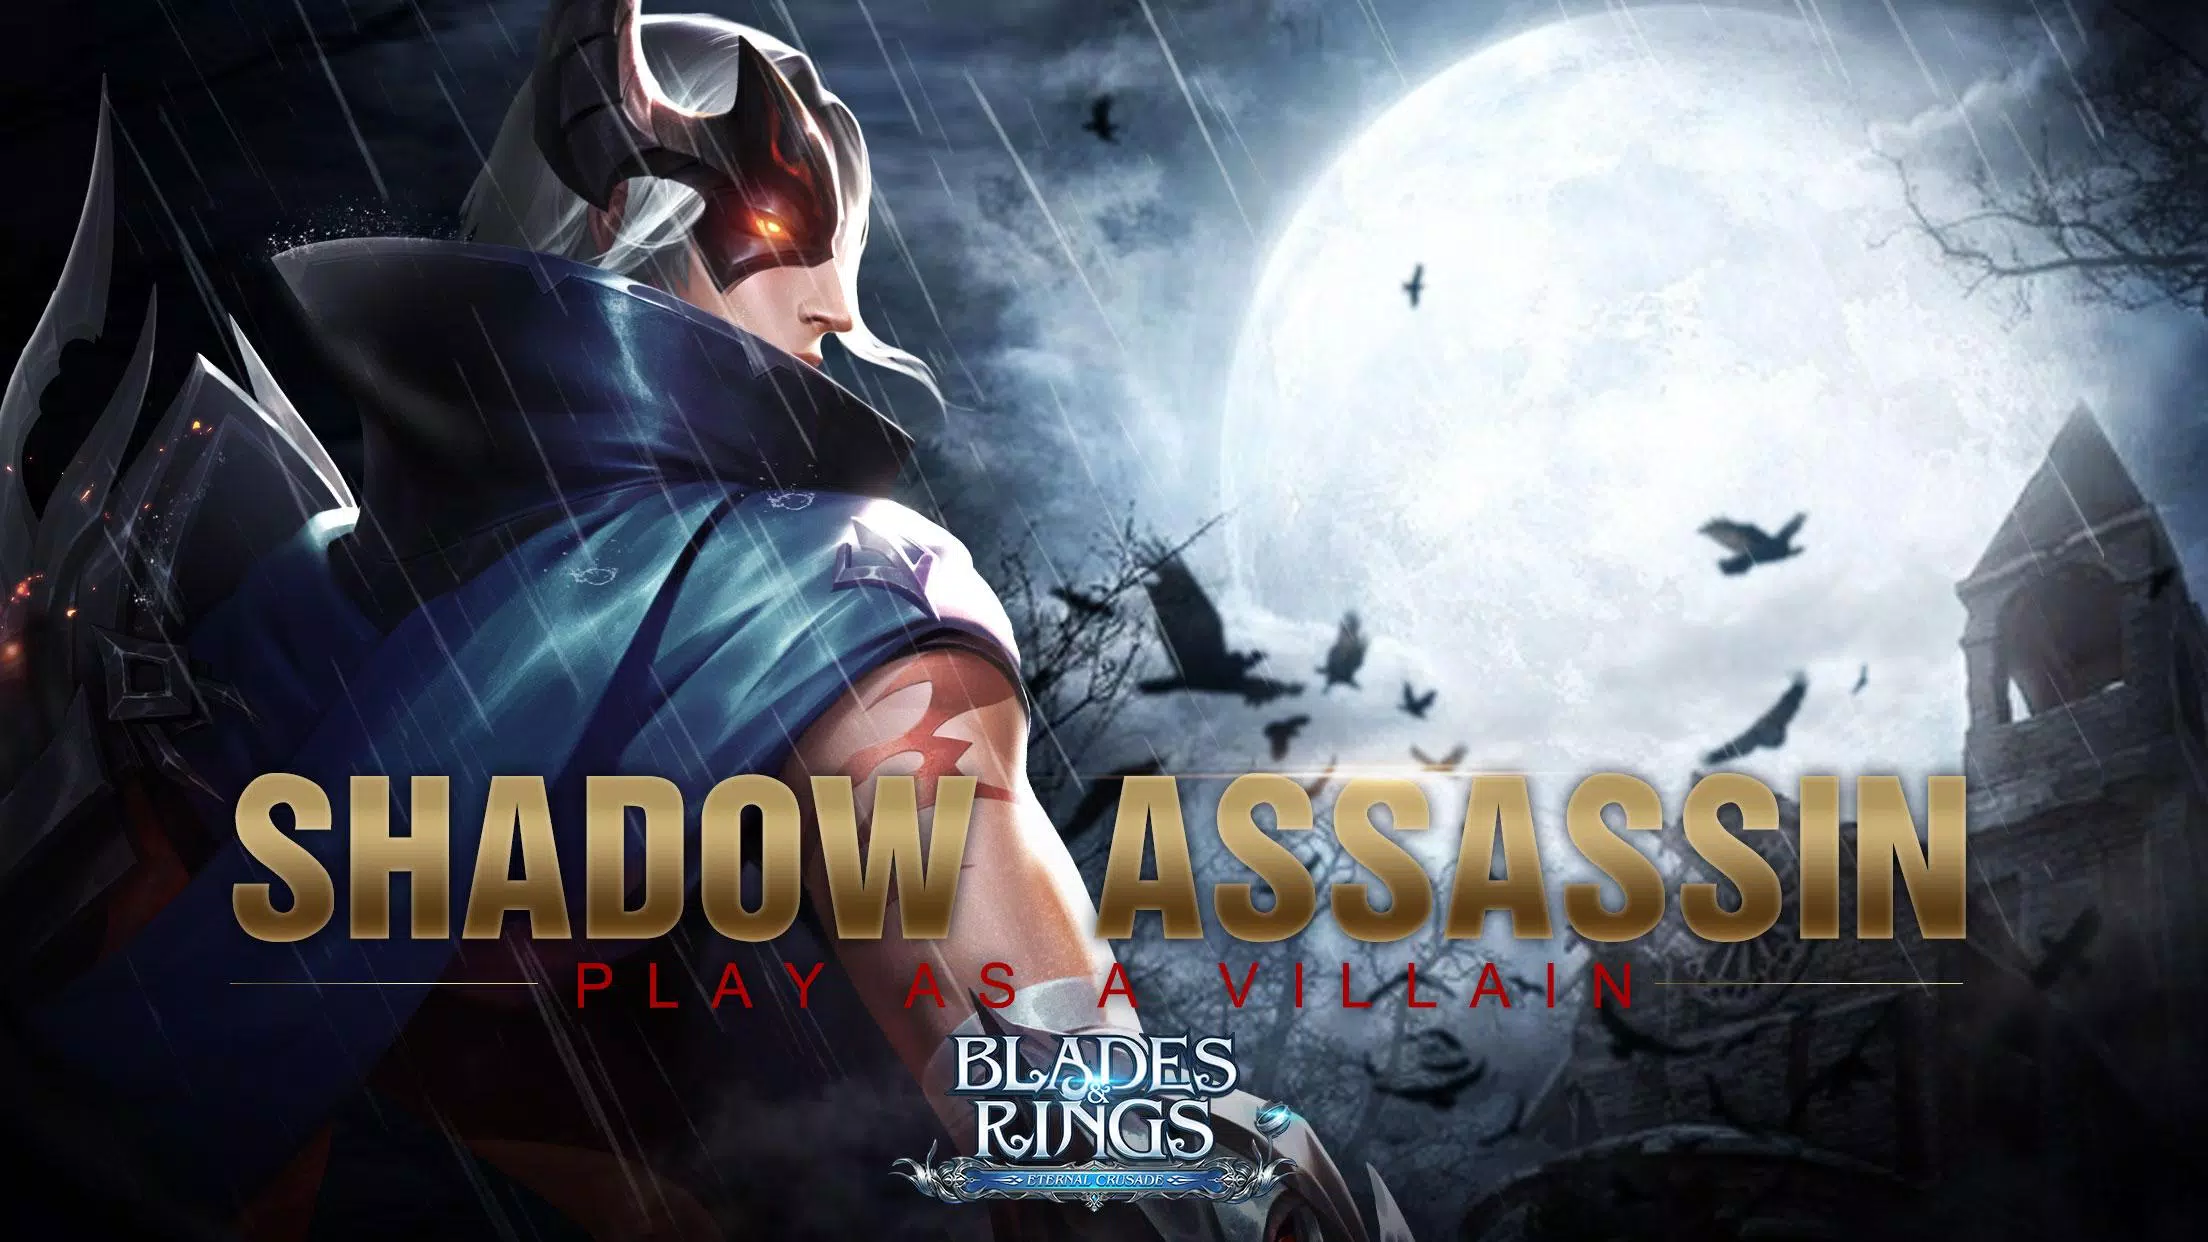 Blades and Rings for Android - APK Download